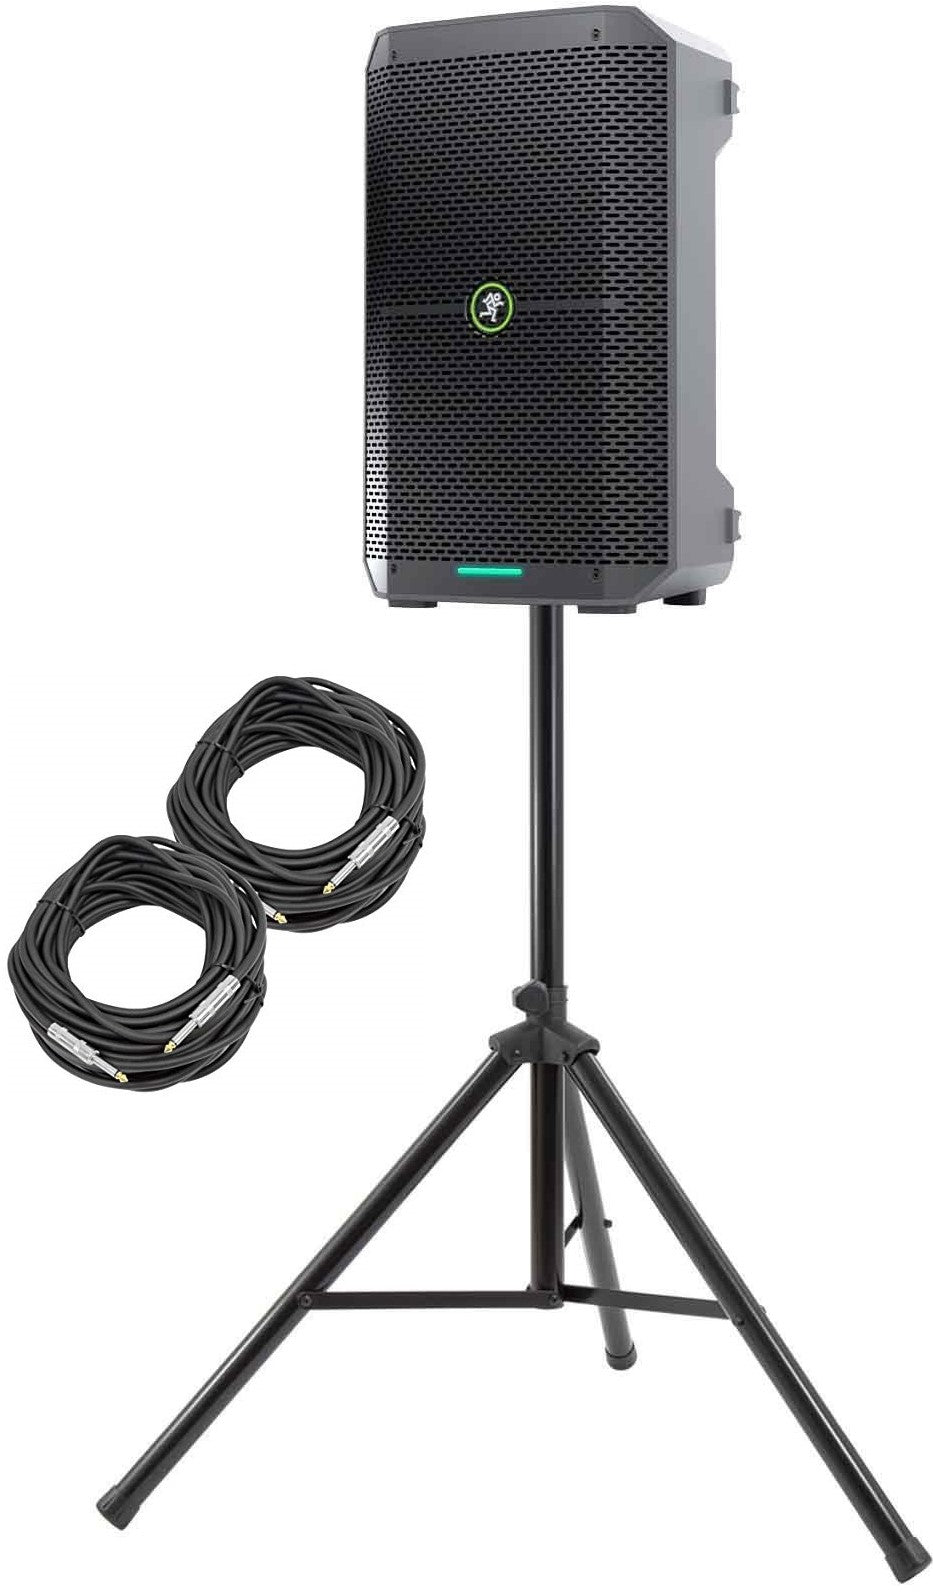 Mackie Thump GO 8" Portable Battery-Powered Loudspeaker +Stand + 2 Cable